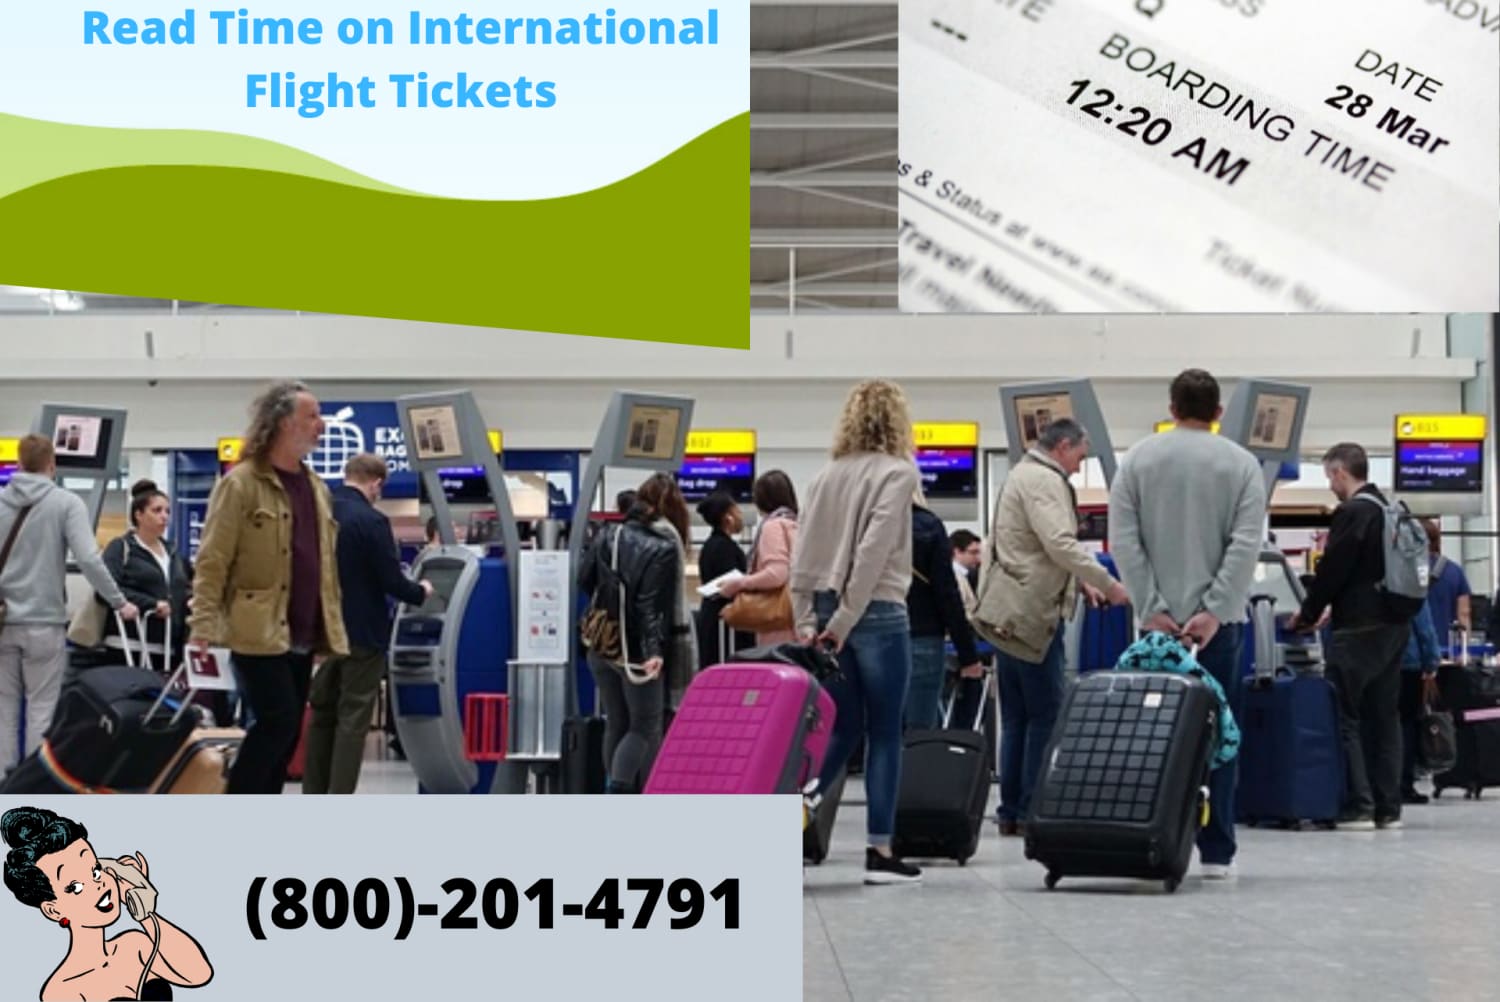 how to read time on International flight tickets? (800)-201-4791